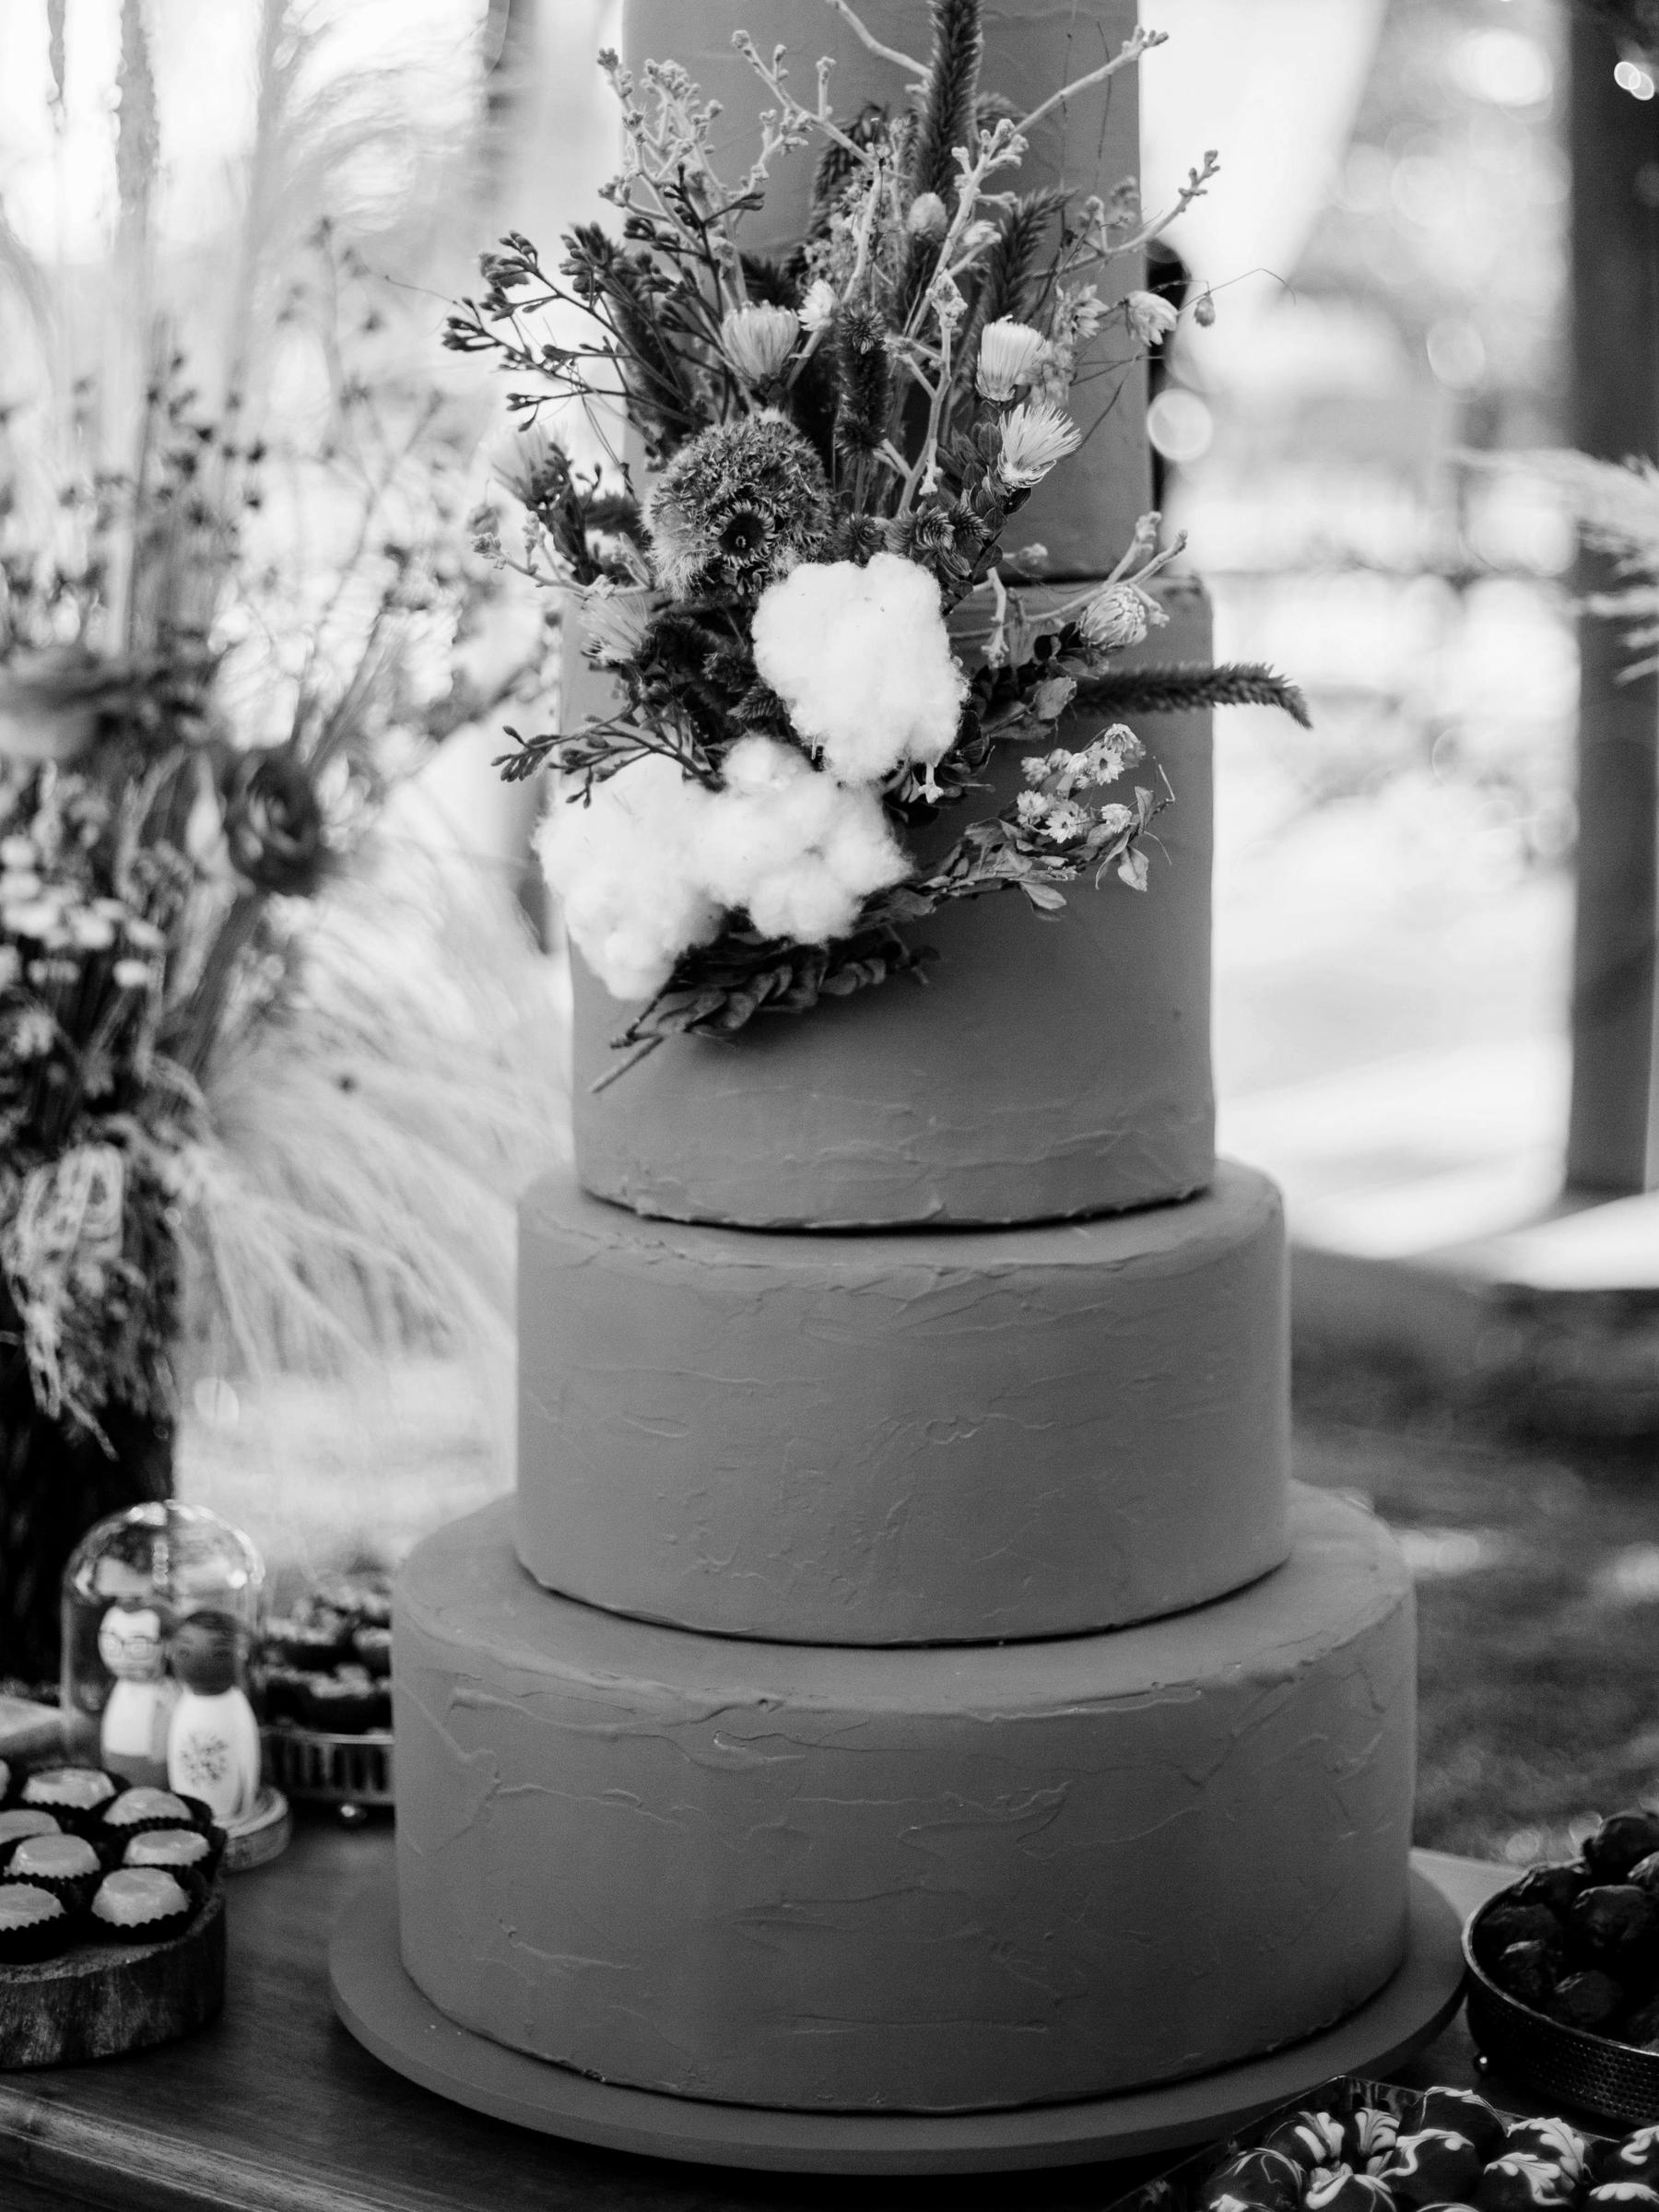 The colossal wedding cake | Source: Pexels